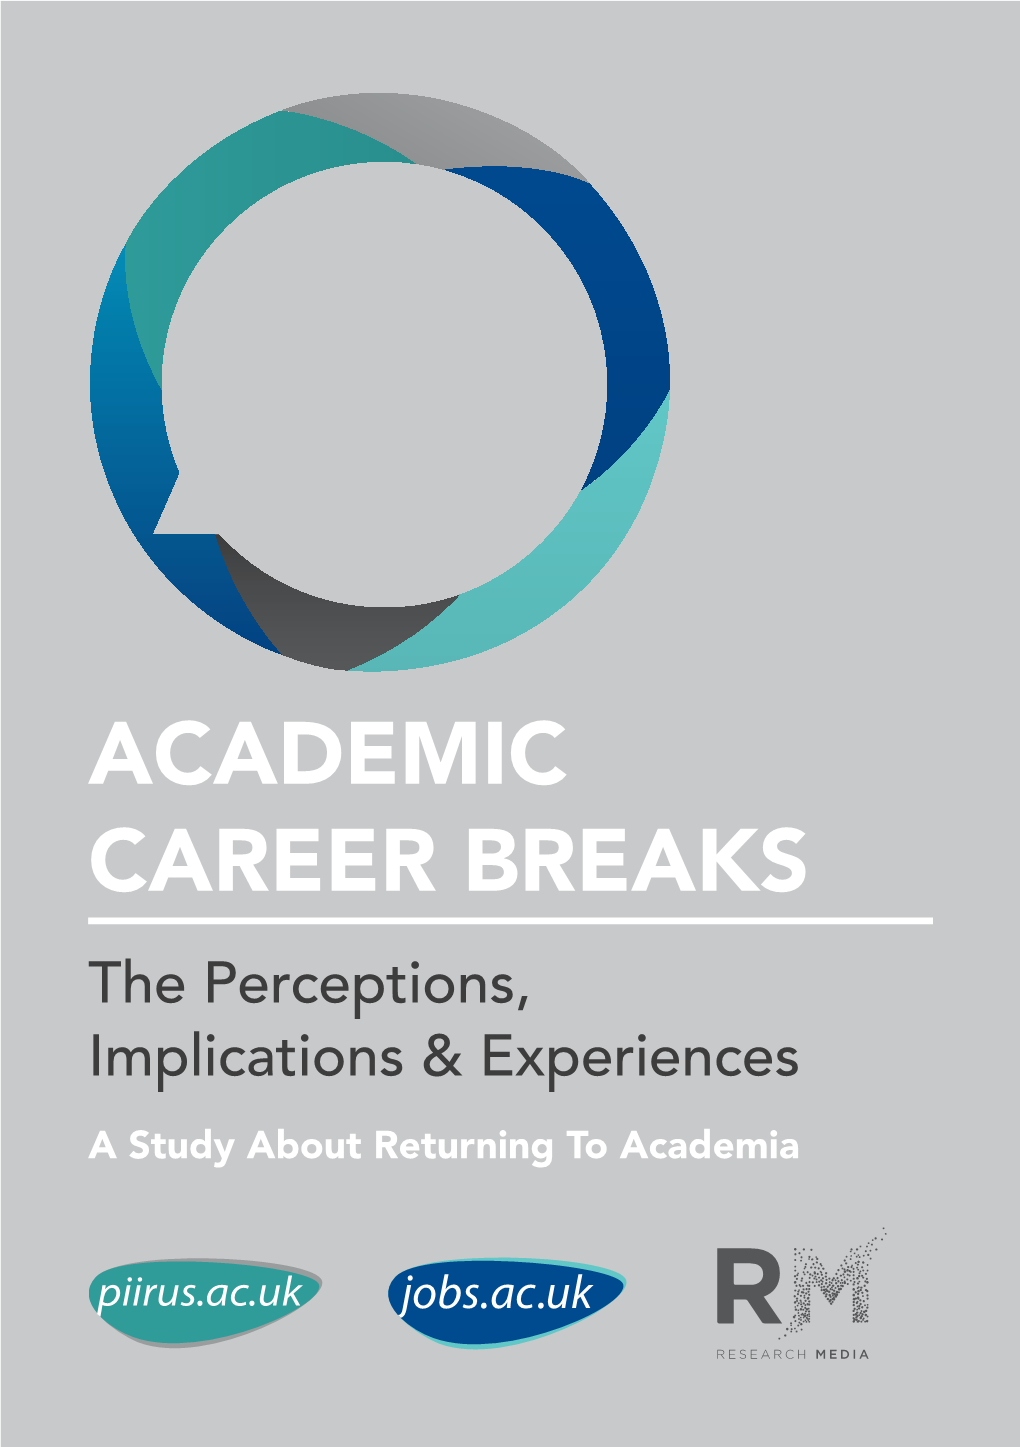 ACADEMIC CAREER BREAKS the Perceptions, Implications & Experiences a Study About Returning to Academia